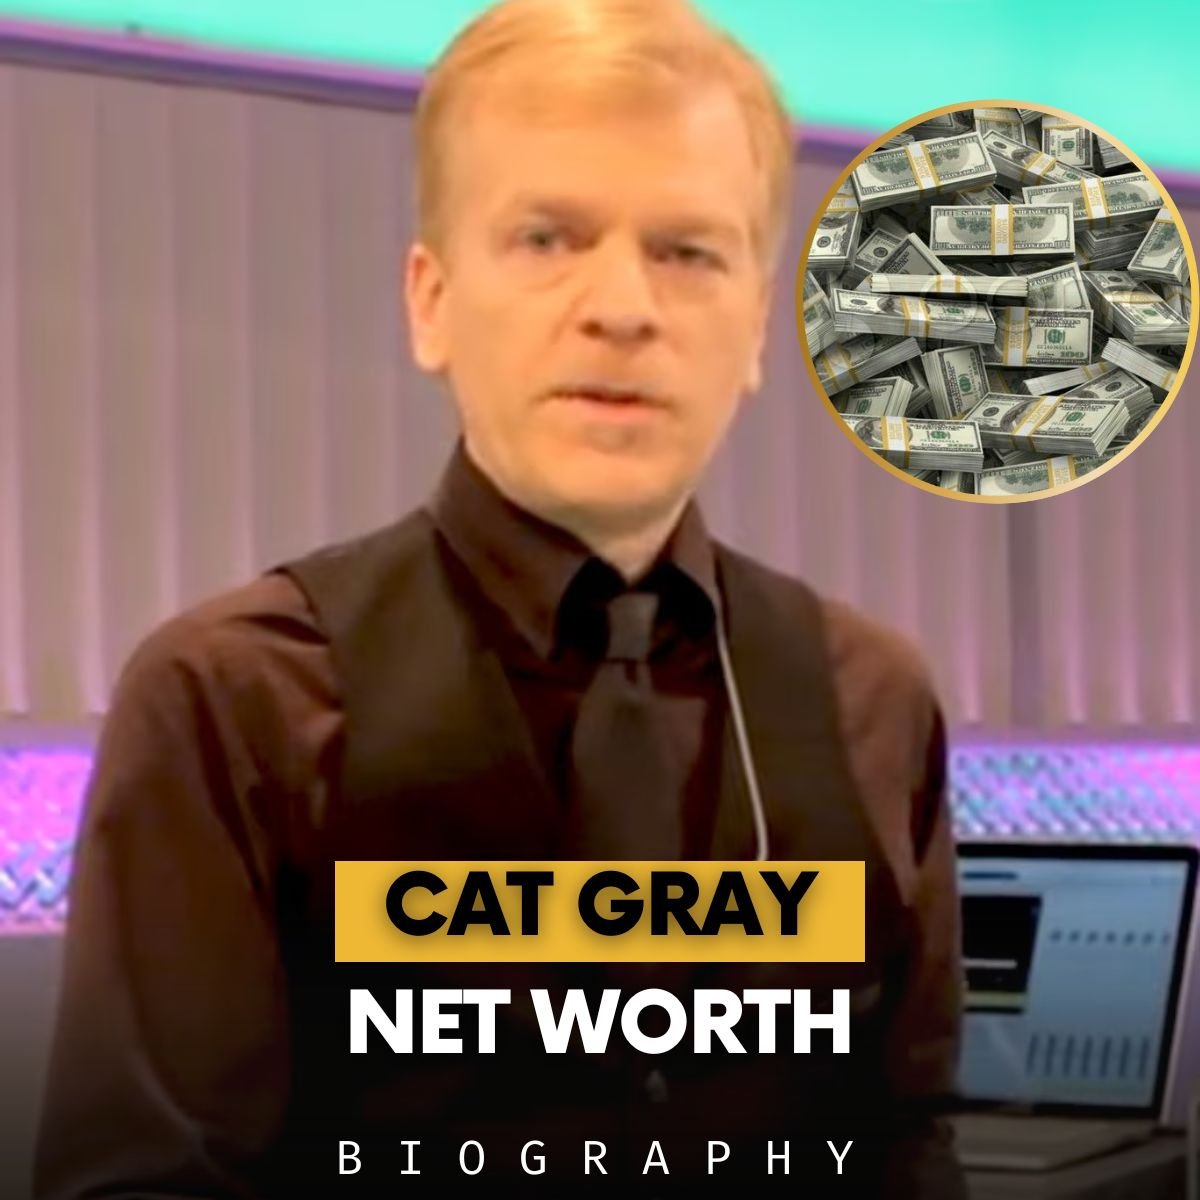 Heading To The ‘Oomph’ Of Cat Gray Net Worth (How Much He Earns?)